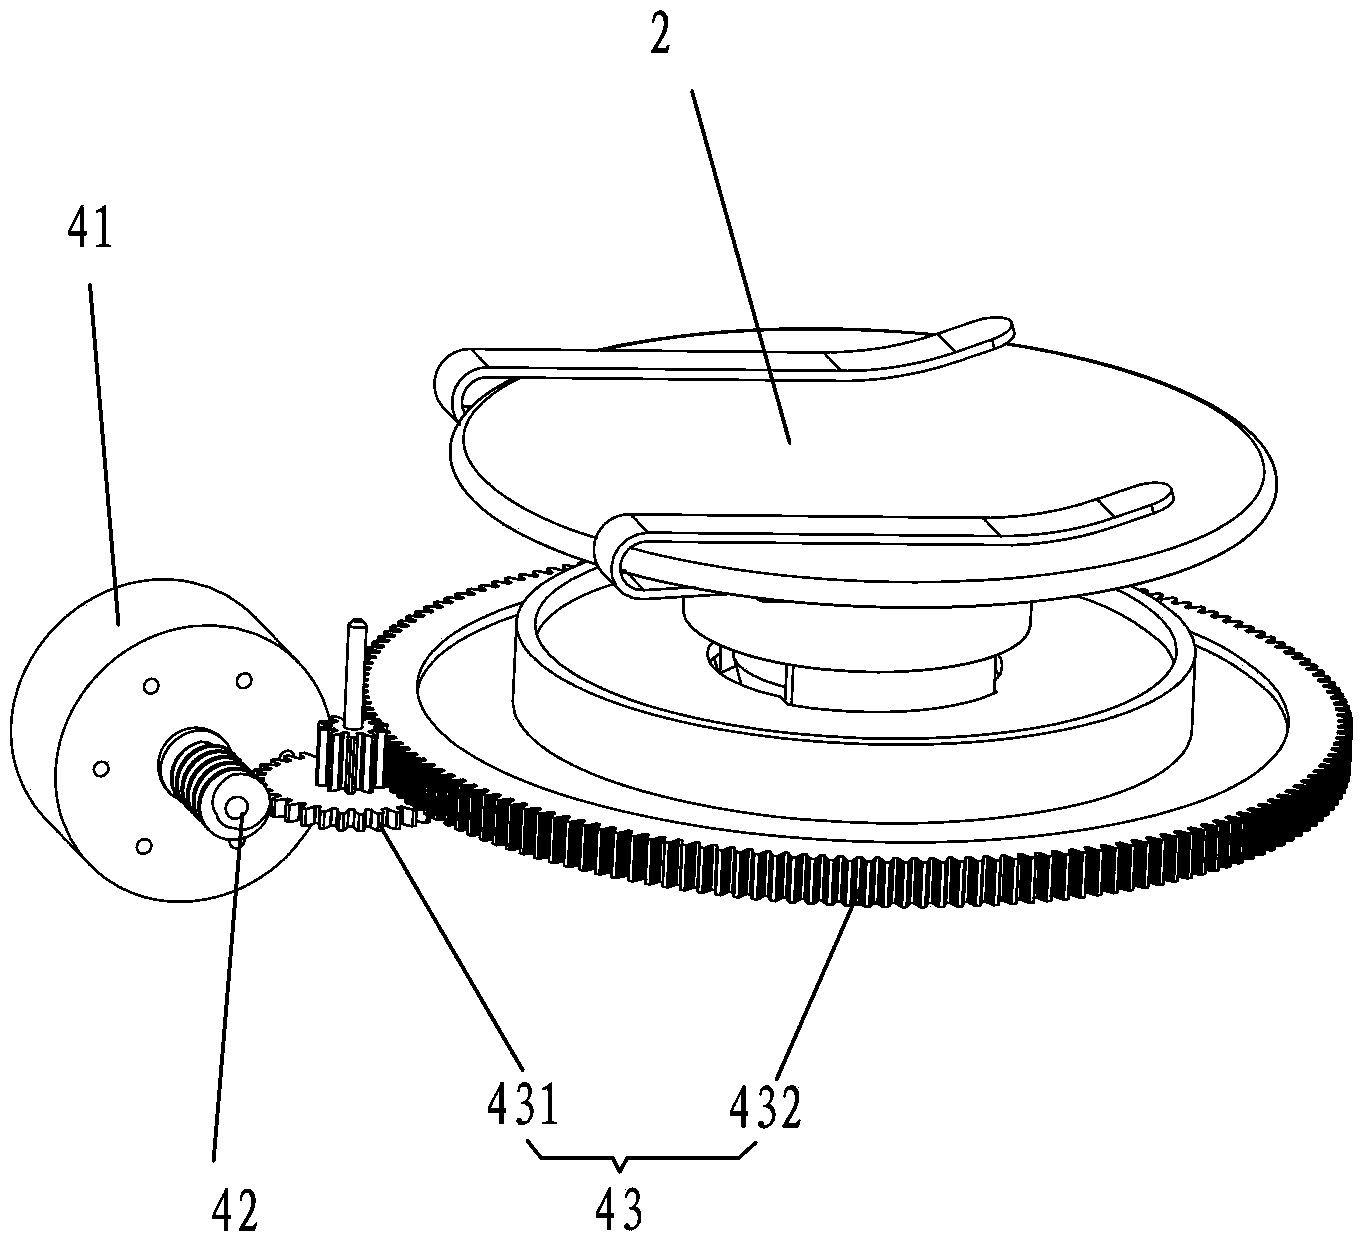 Microscope device capable of observing object to be tested at multiple angles